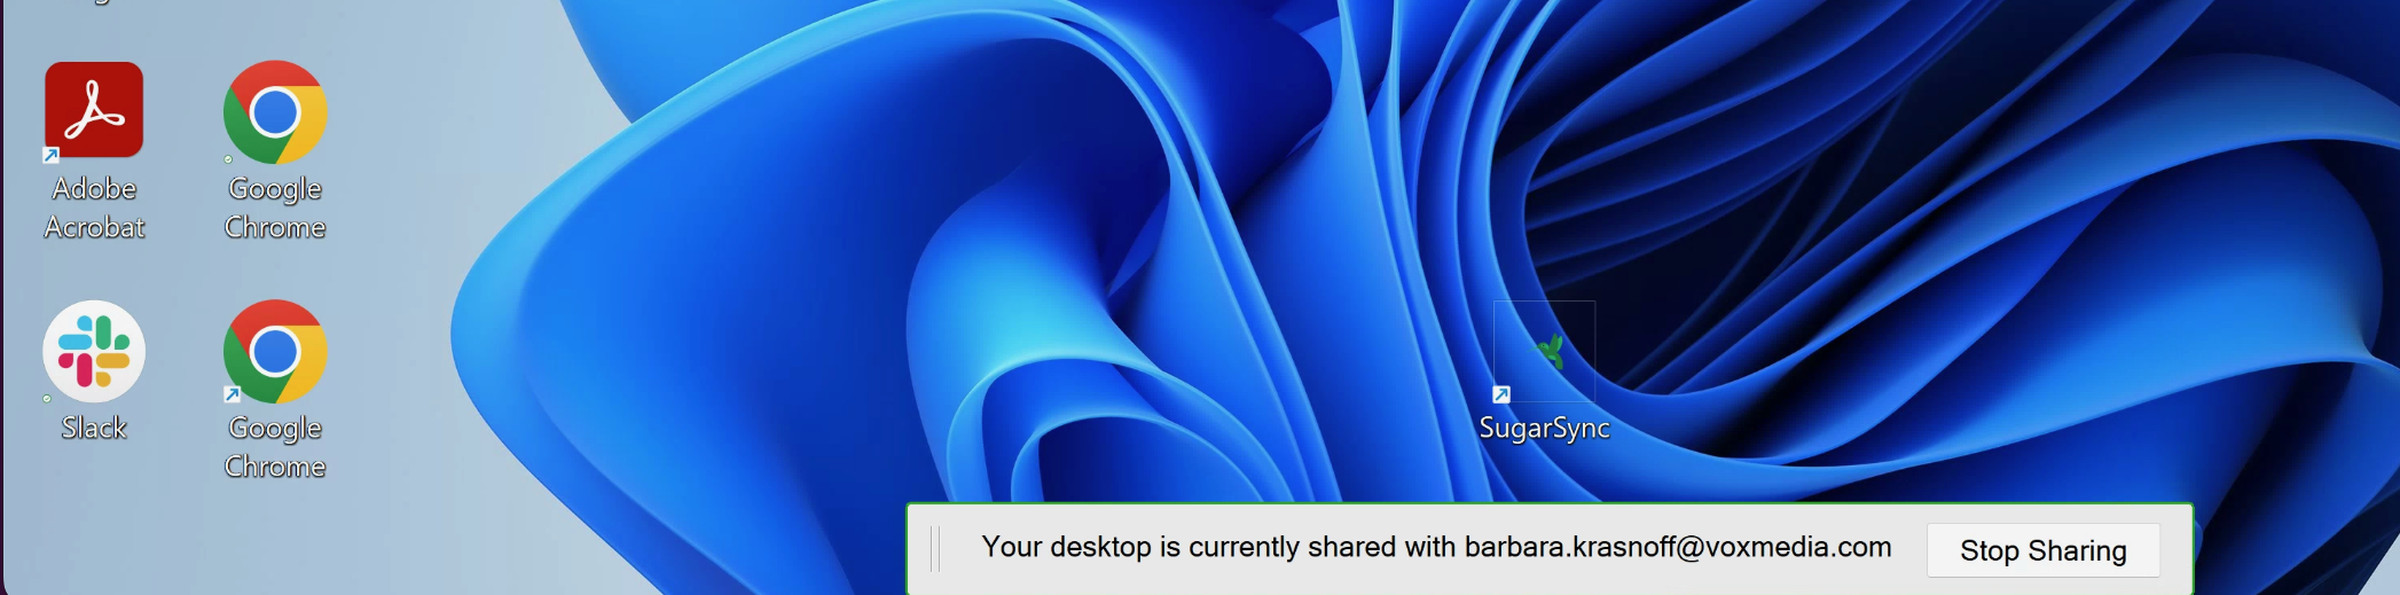 Part of a computer screen with some icons on the left, a blue flower in background, and a notification on bottom saying “Your desktop is currently being shared with barbara.krasnoff@voxmedia.com” and a button to stop sharing.